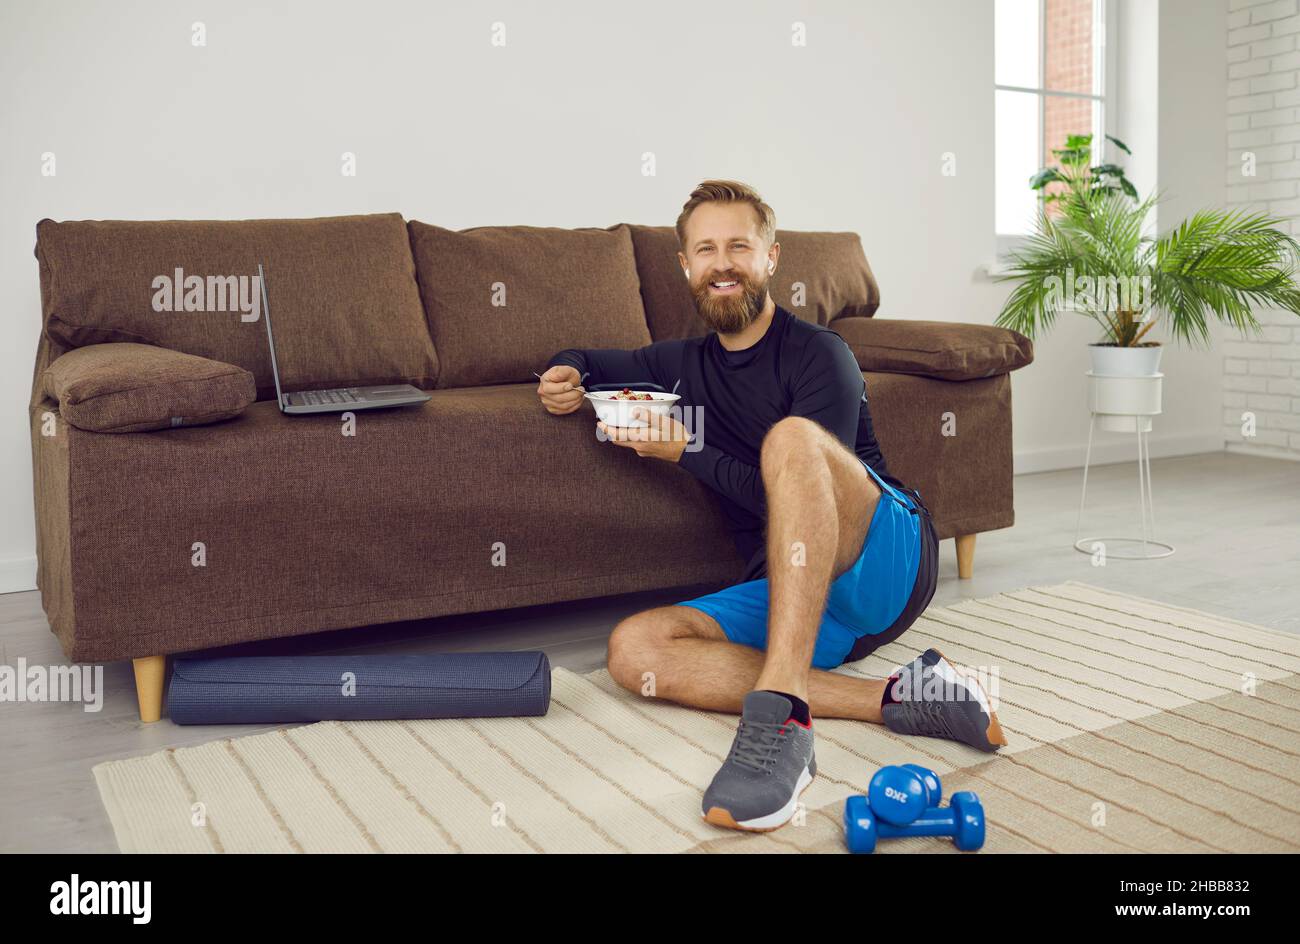 Happy man having break during his home workout, eating healthy food and using laptop Stock Photo